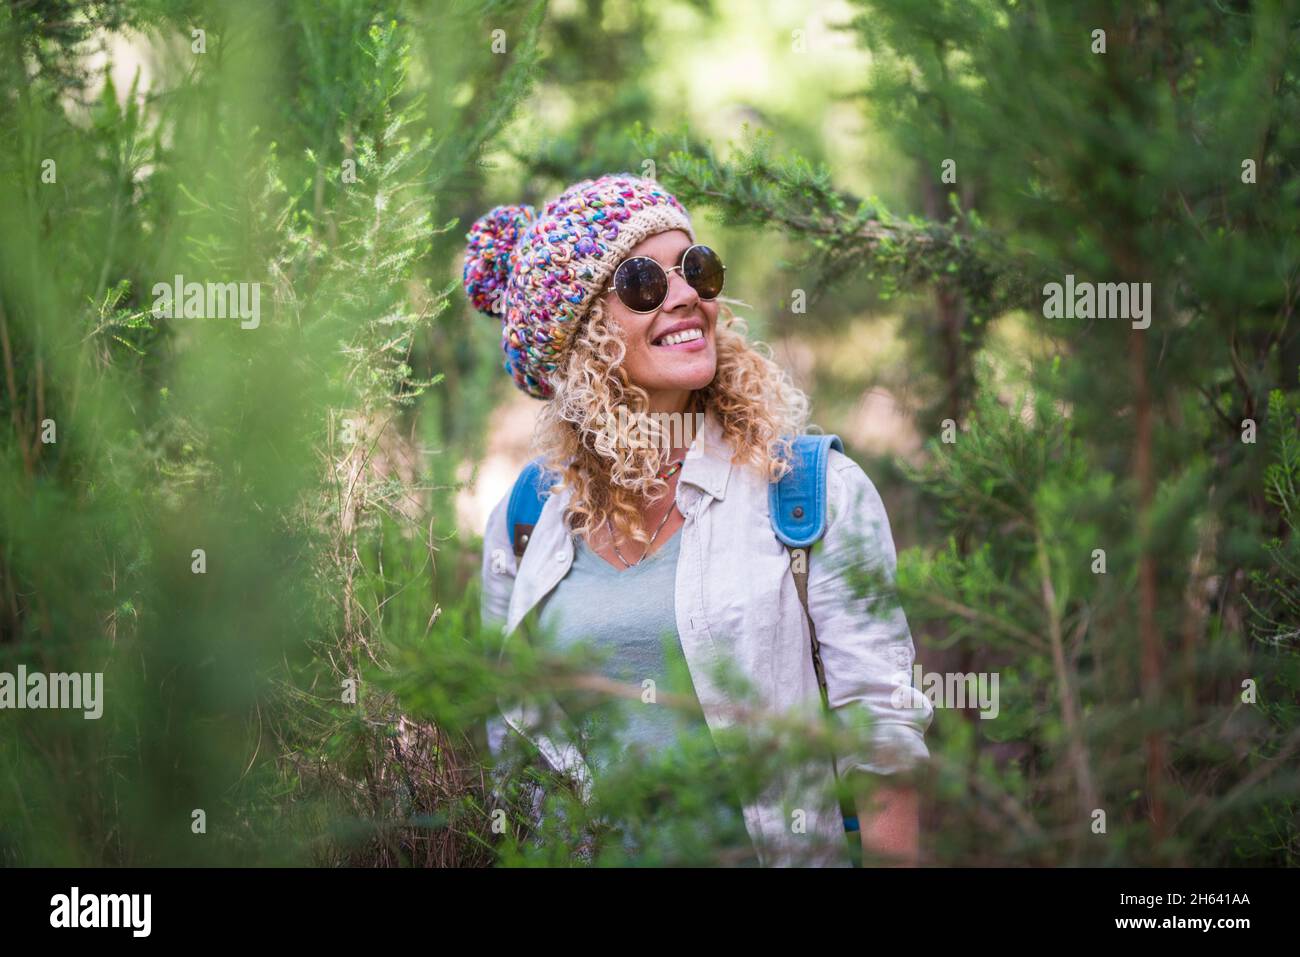 pretty adult cheerful woman smile and enjoy the outdoor nature forest leisure activity walking in the trees and green plants with a backpack - beautiful female people portrait outside enjoying adventure vacation Stock Photo